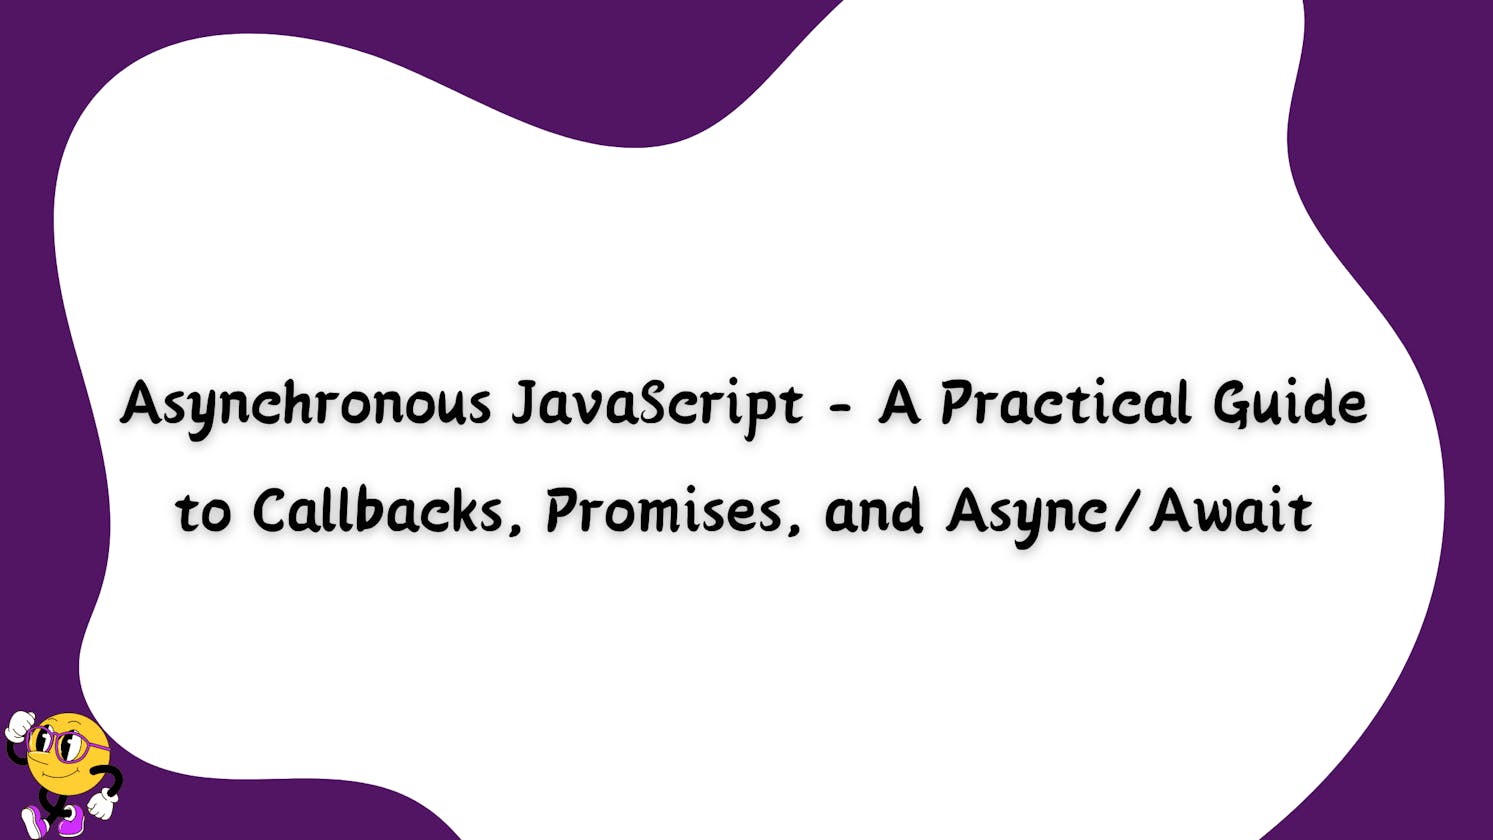 Asynchronous JavaScript - A Practical Guide to Callbacks, Promises, and Async/Await